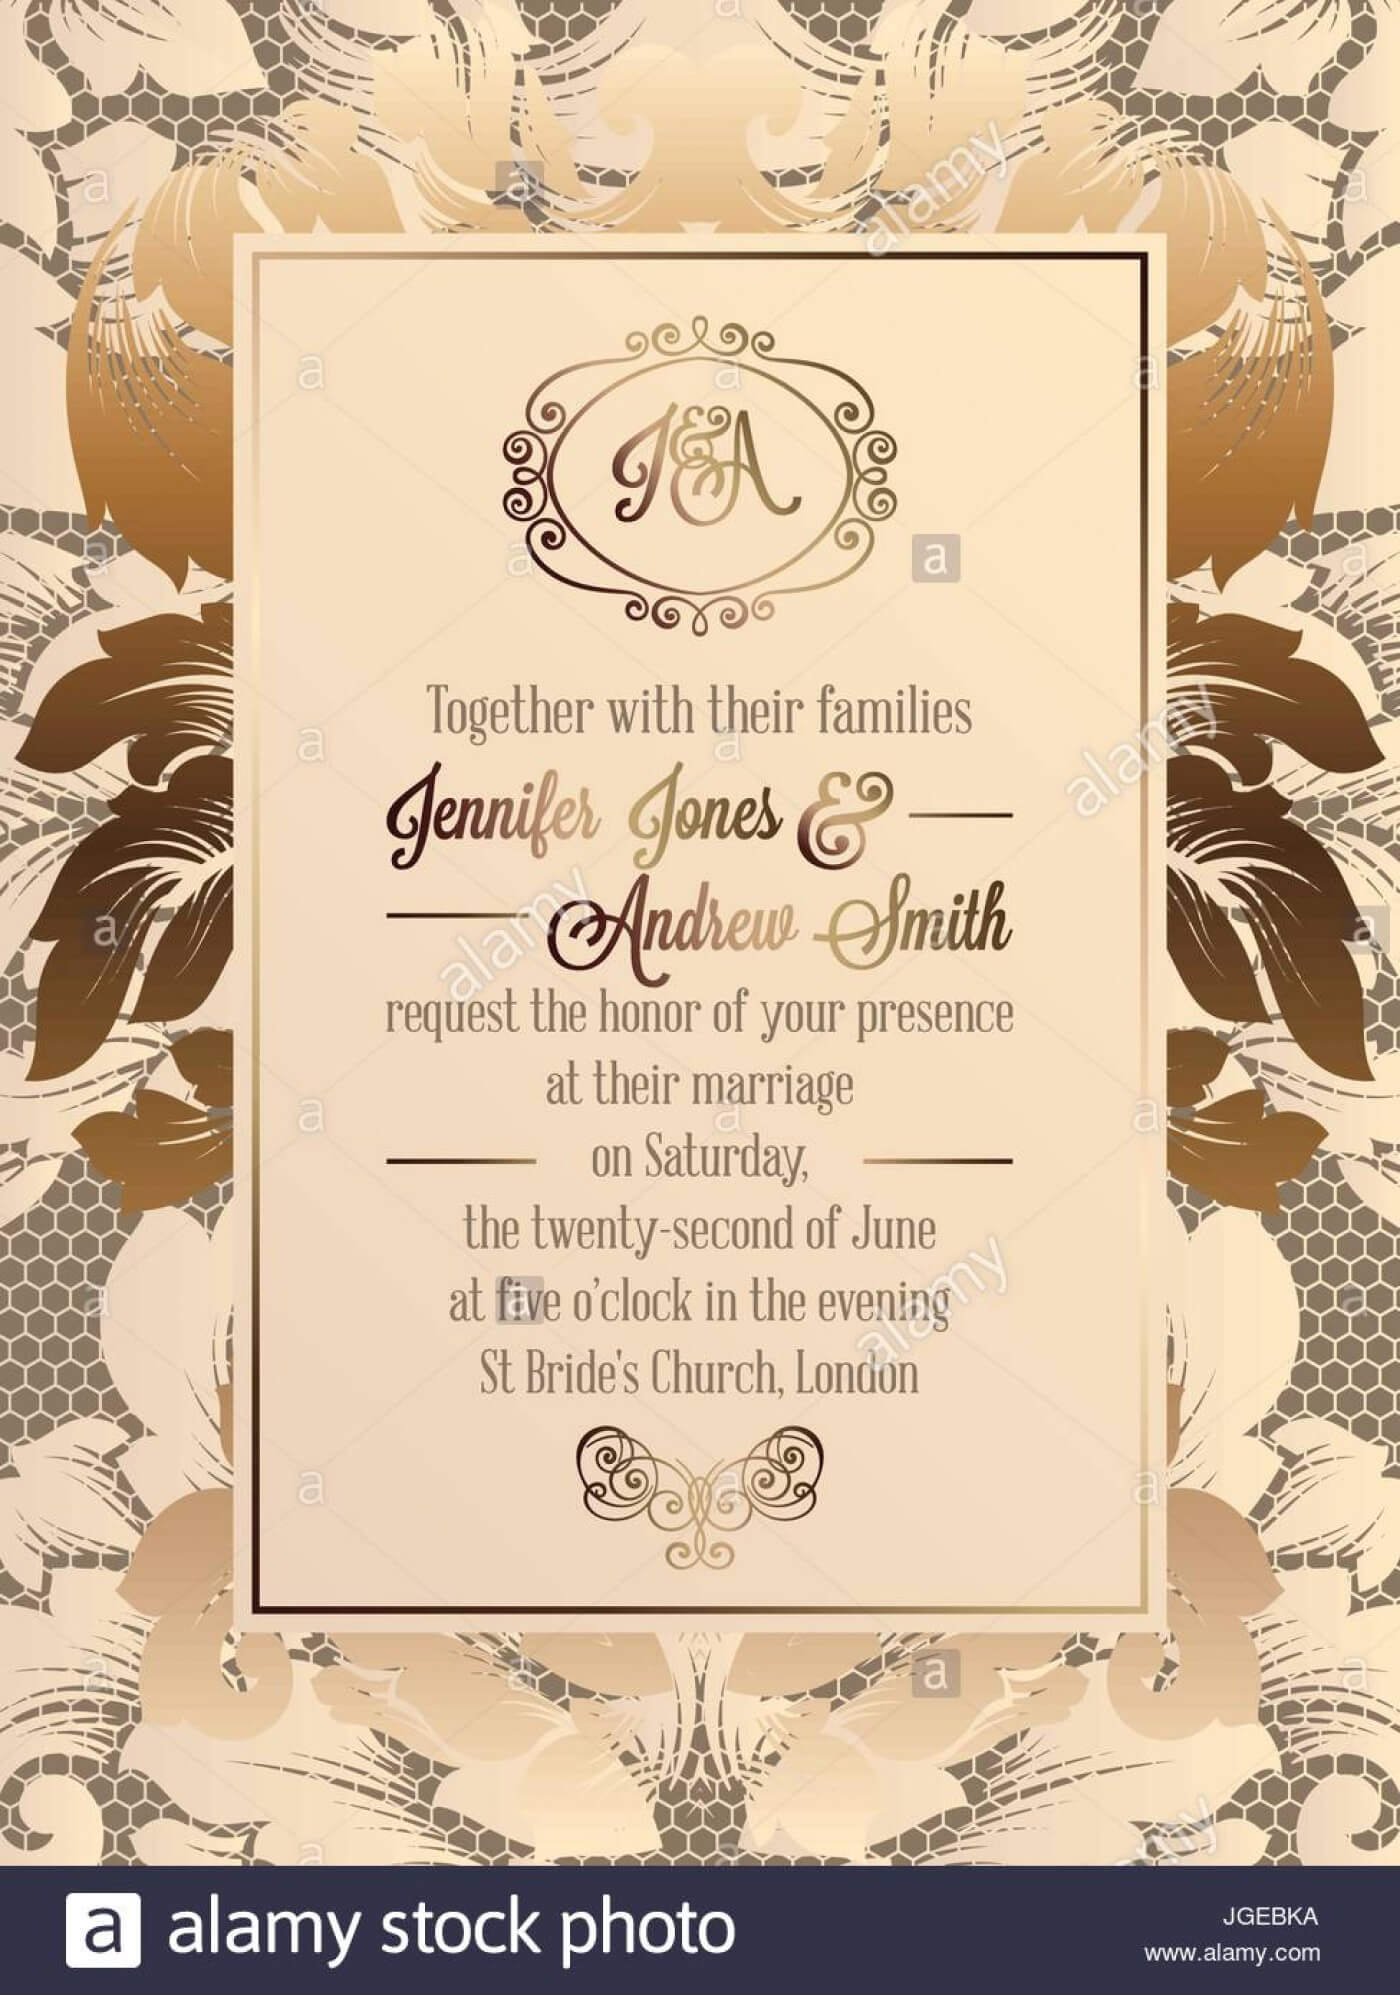 022 Template Ideas Gettyimages Church Invitation Cards Pertaining To Church Wedding Invitation Card Template